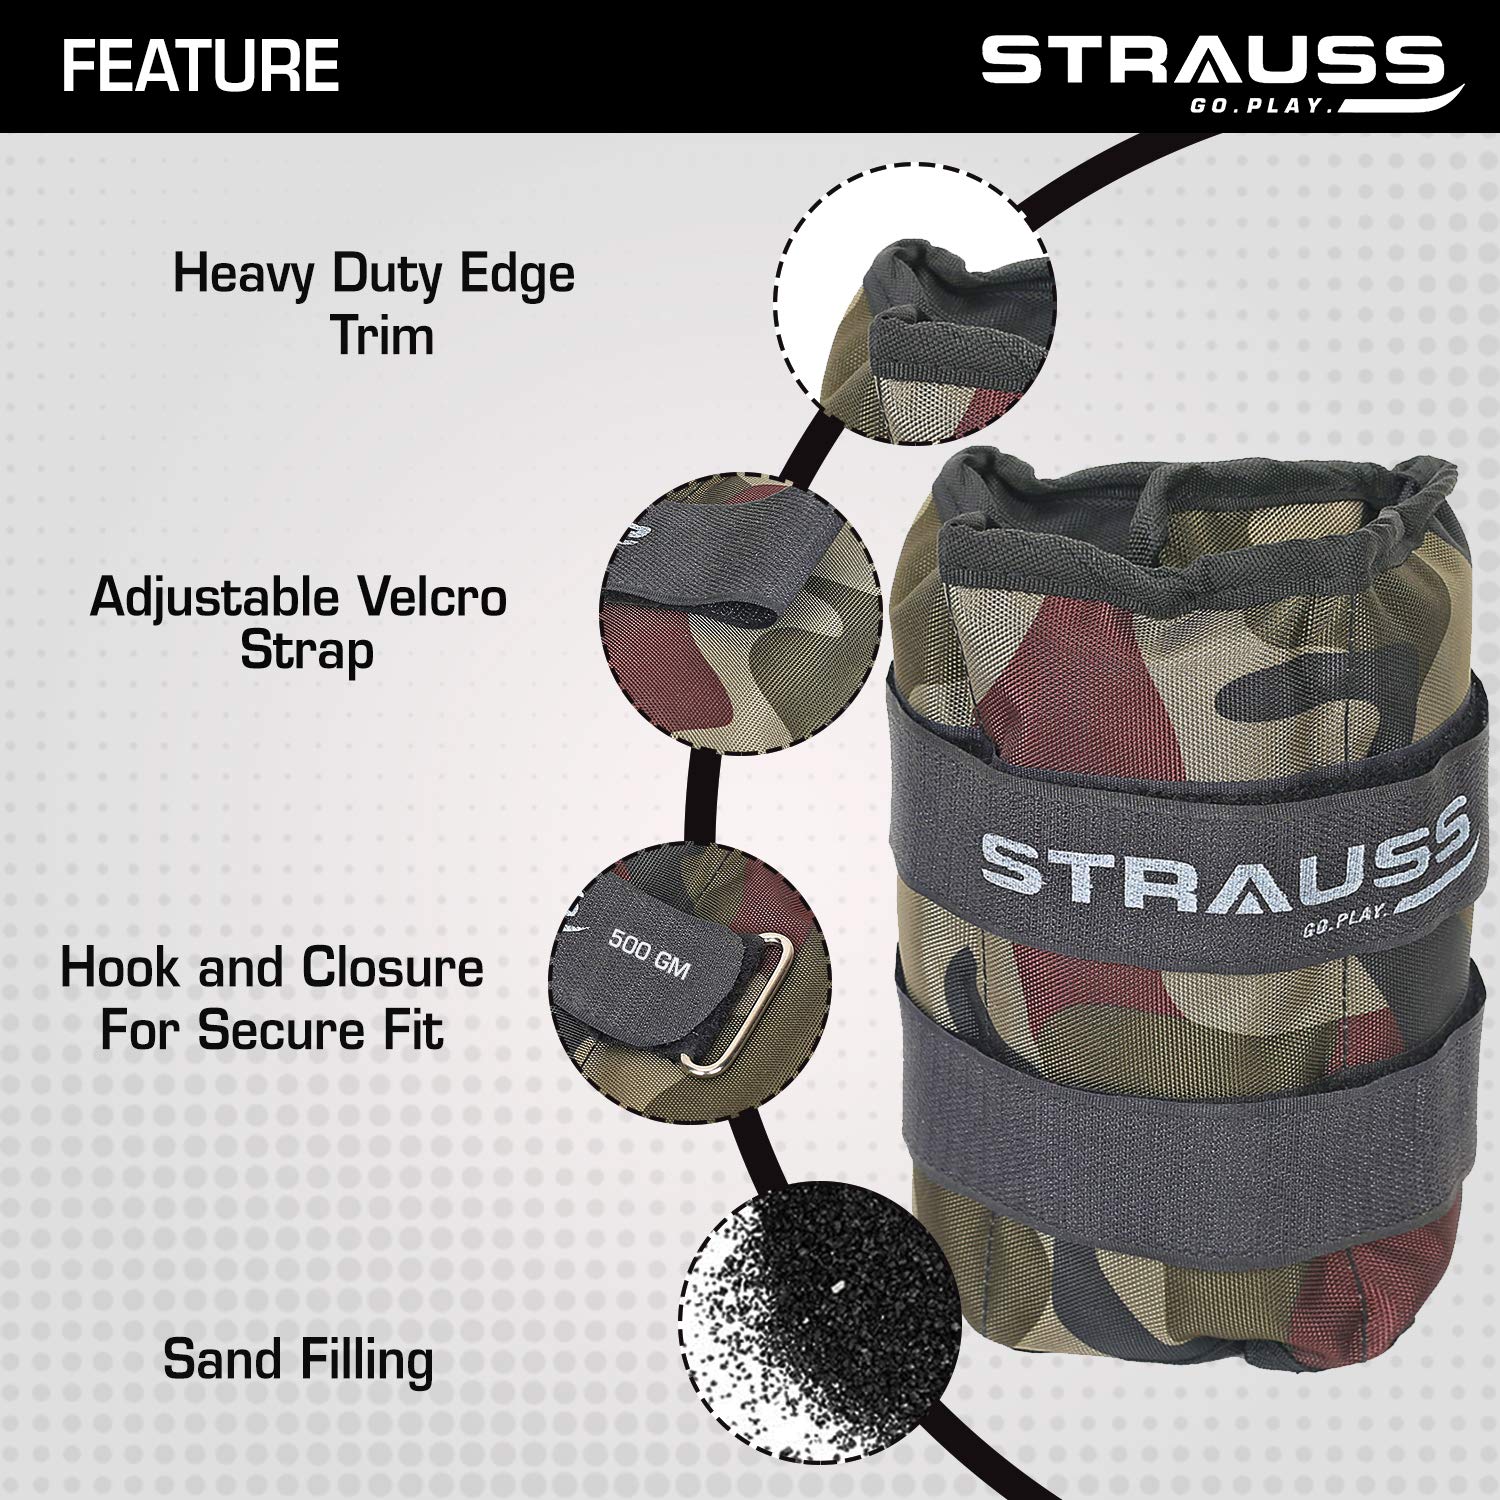 Strauss Adjustable Ankle/Wrist Weights 0.5 KG X 2 | Ideal for Walking, Running, Jogging, Cycling, Gym, Workout & Strength Training | Easy to Use on Ankle, Wrist, Leg, (Camouflage)